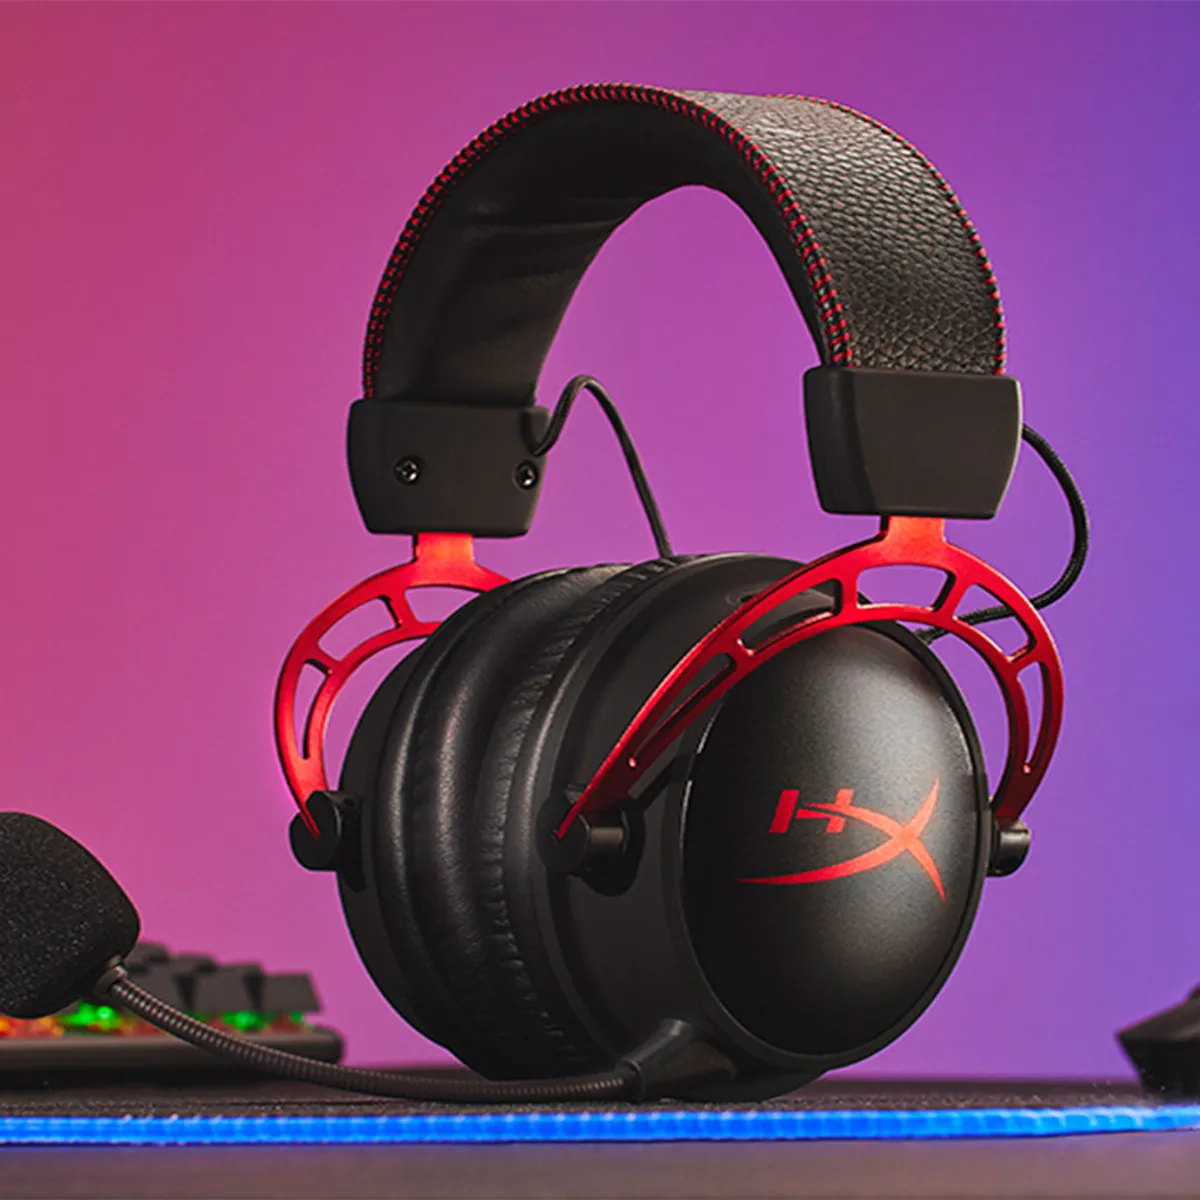 HyperX Headset Woes: Troubleshooting Common Issues